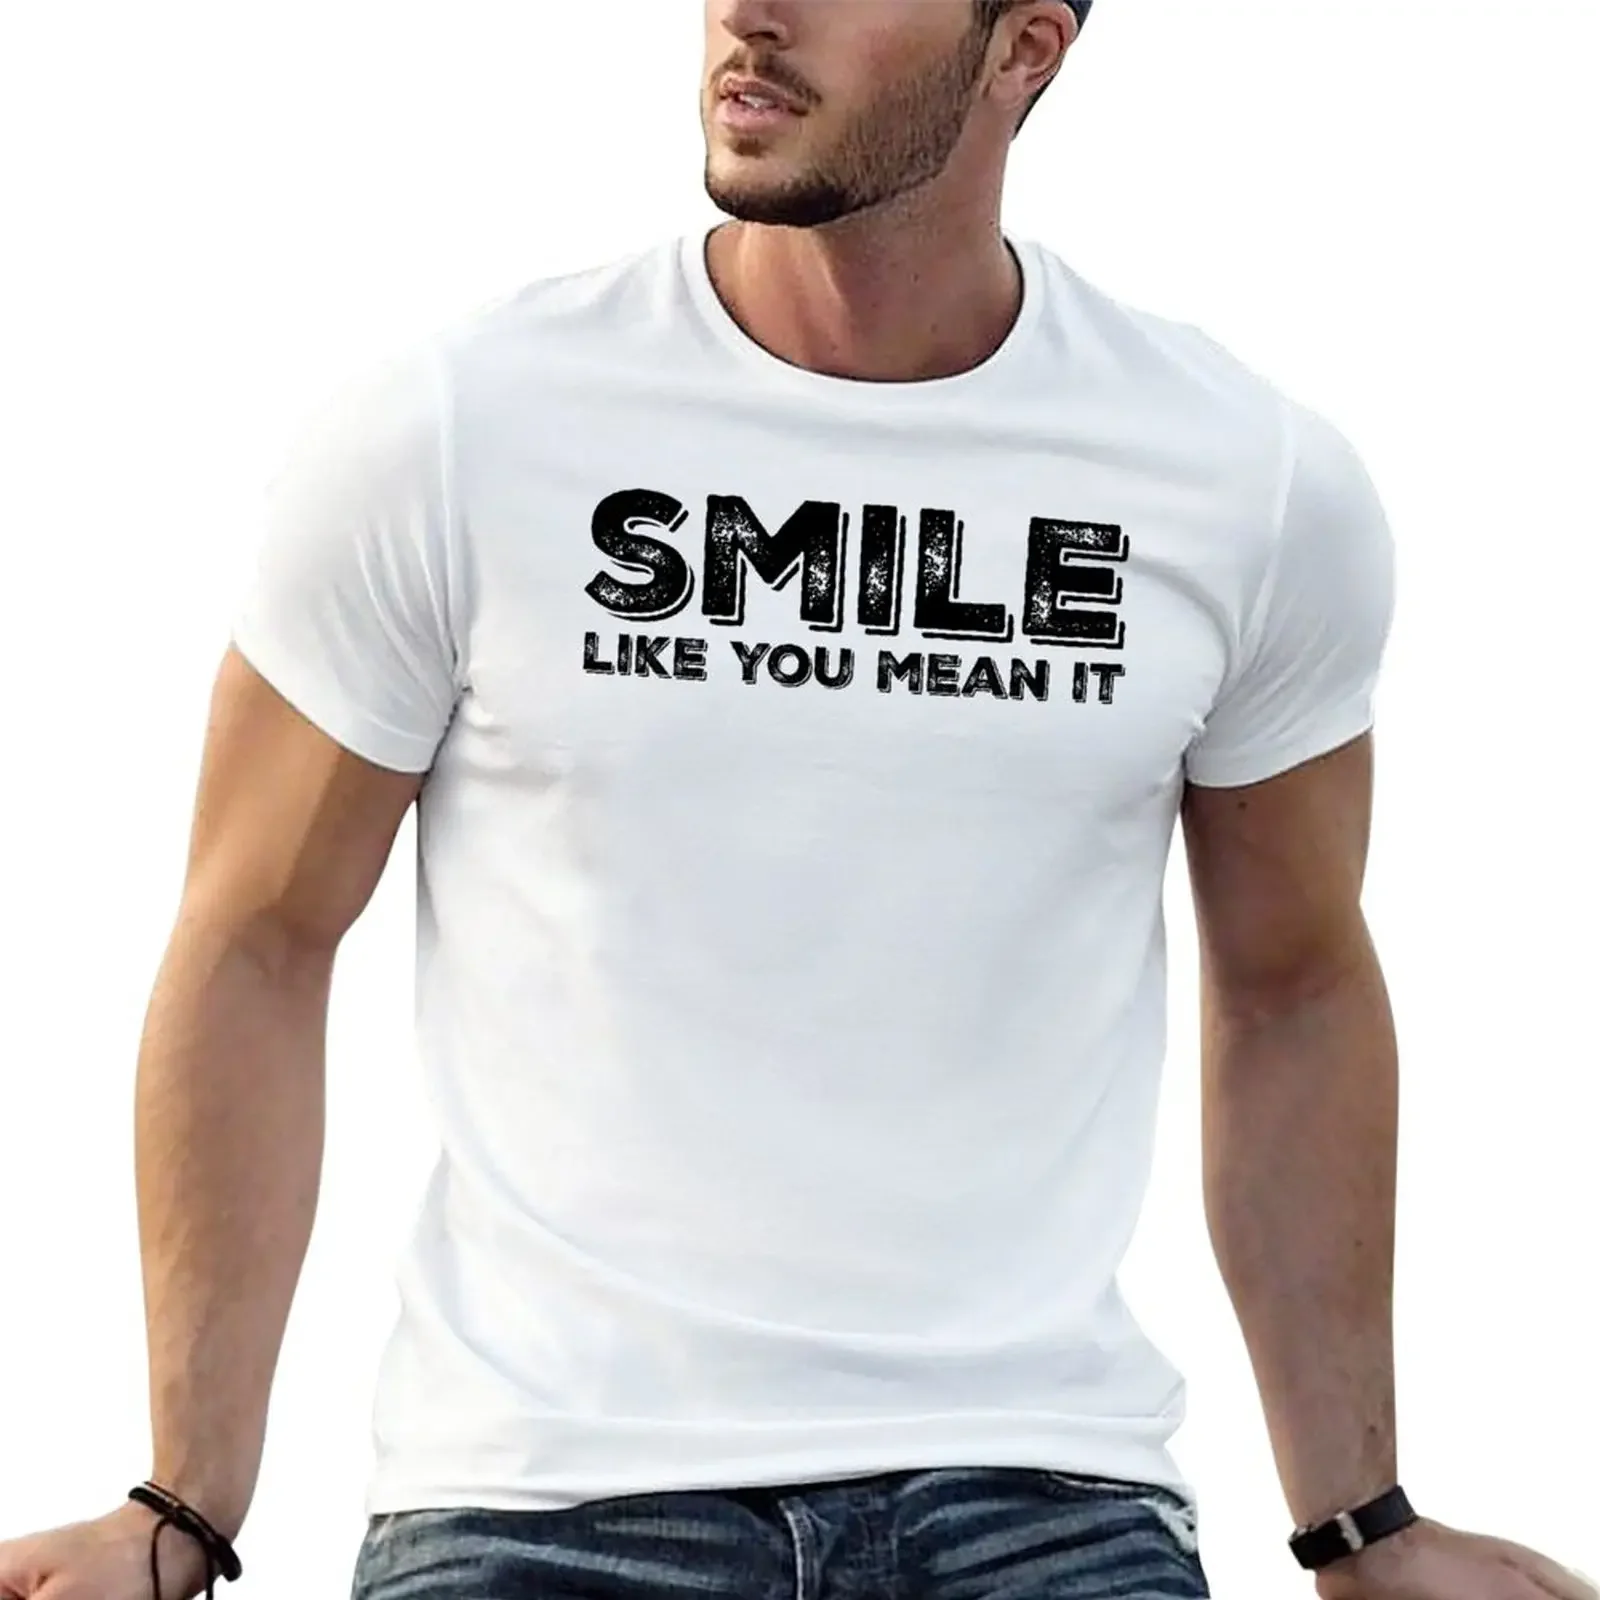 

Smile Like You Mean It T-Shirt Blouse summer tops t shirts for men